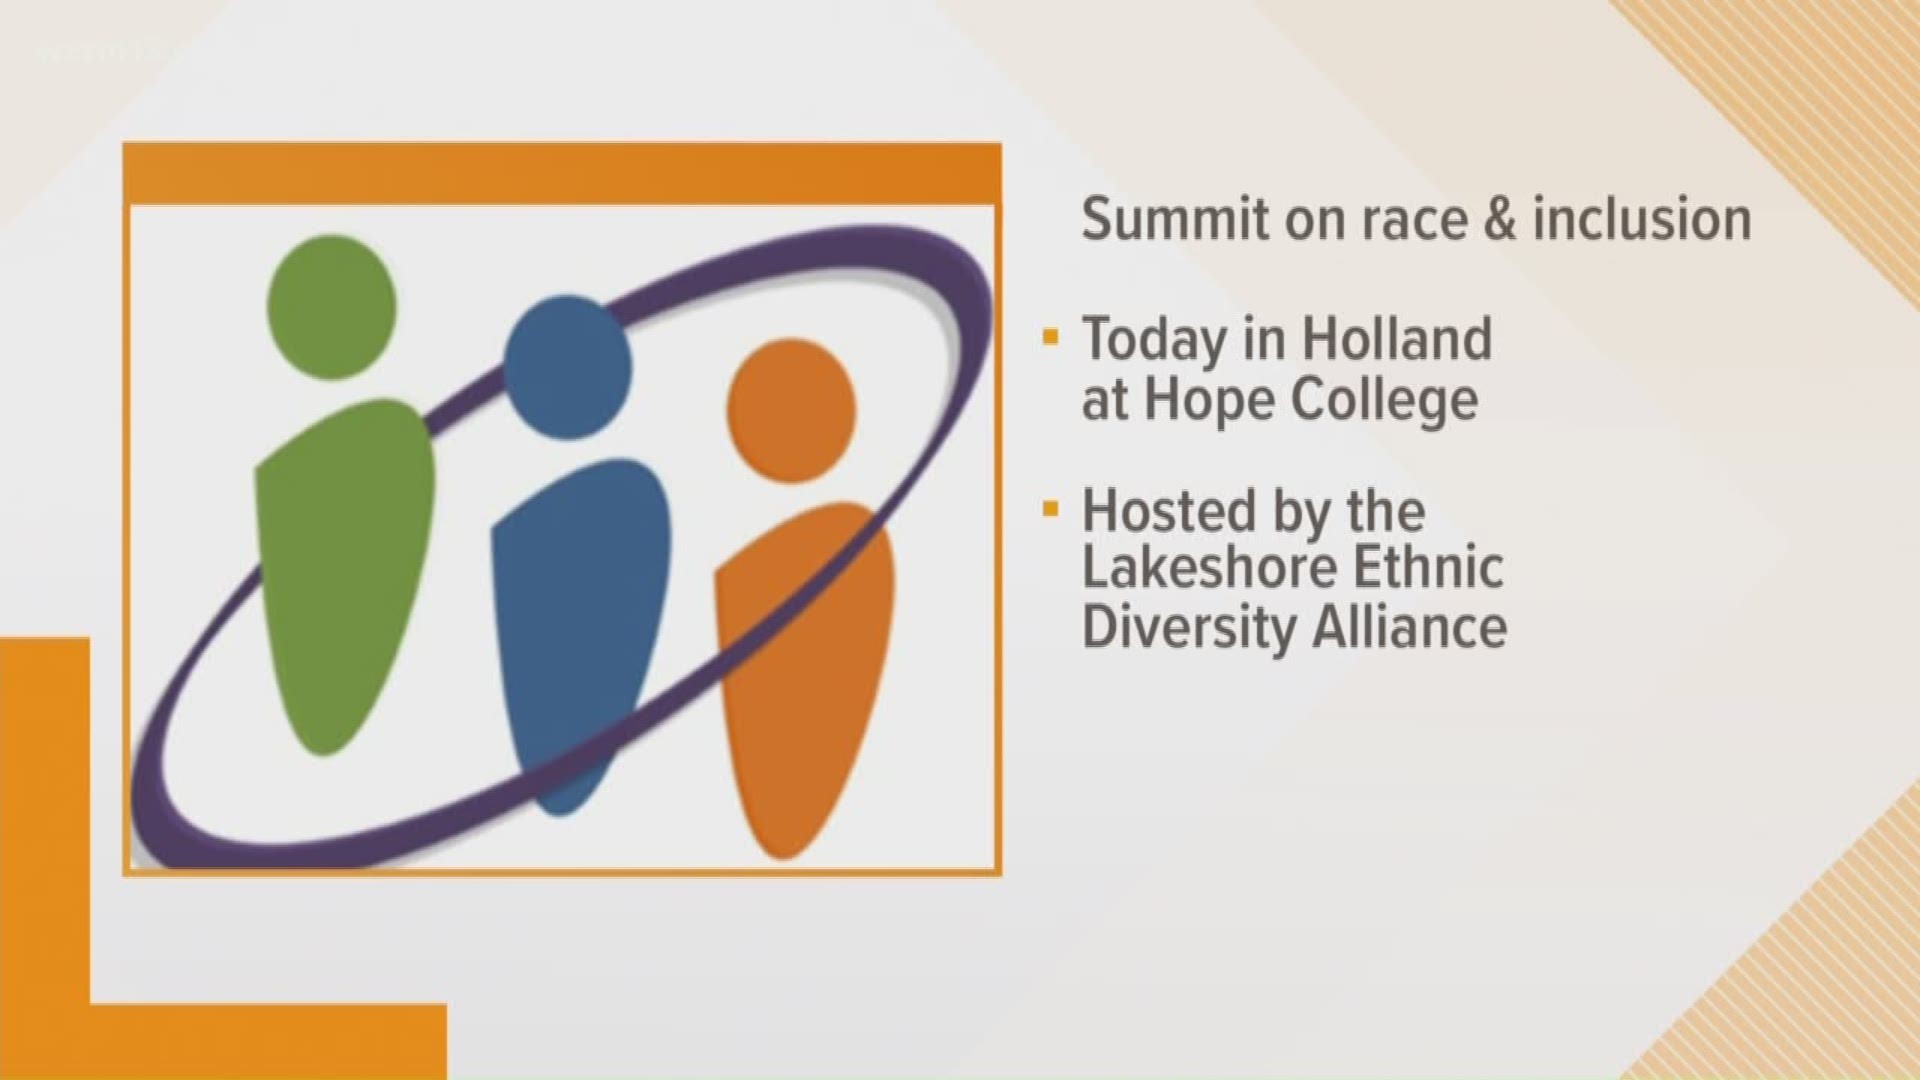 Summit on race and inclusion in Holland